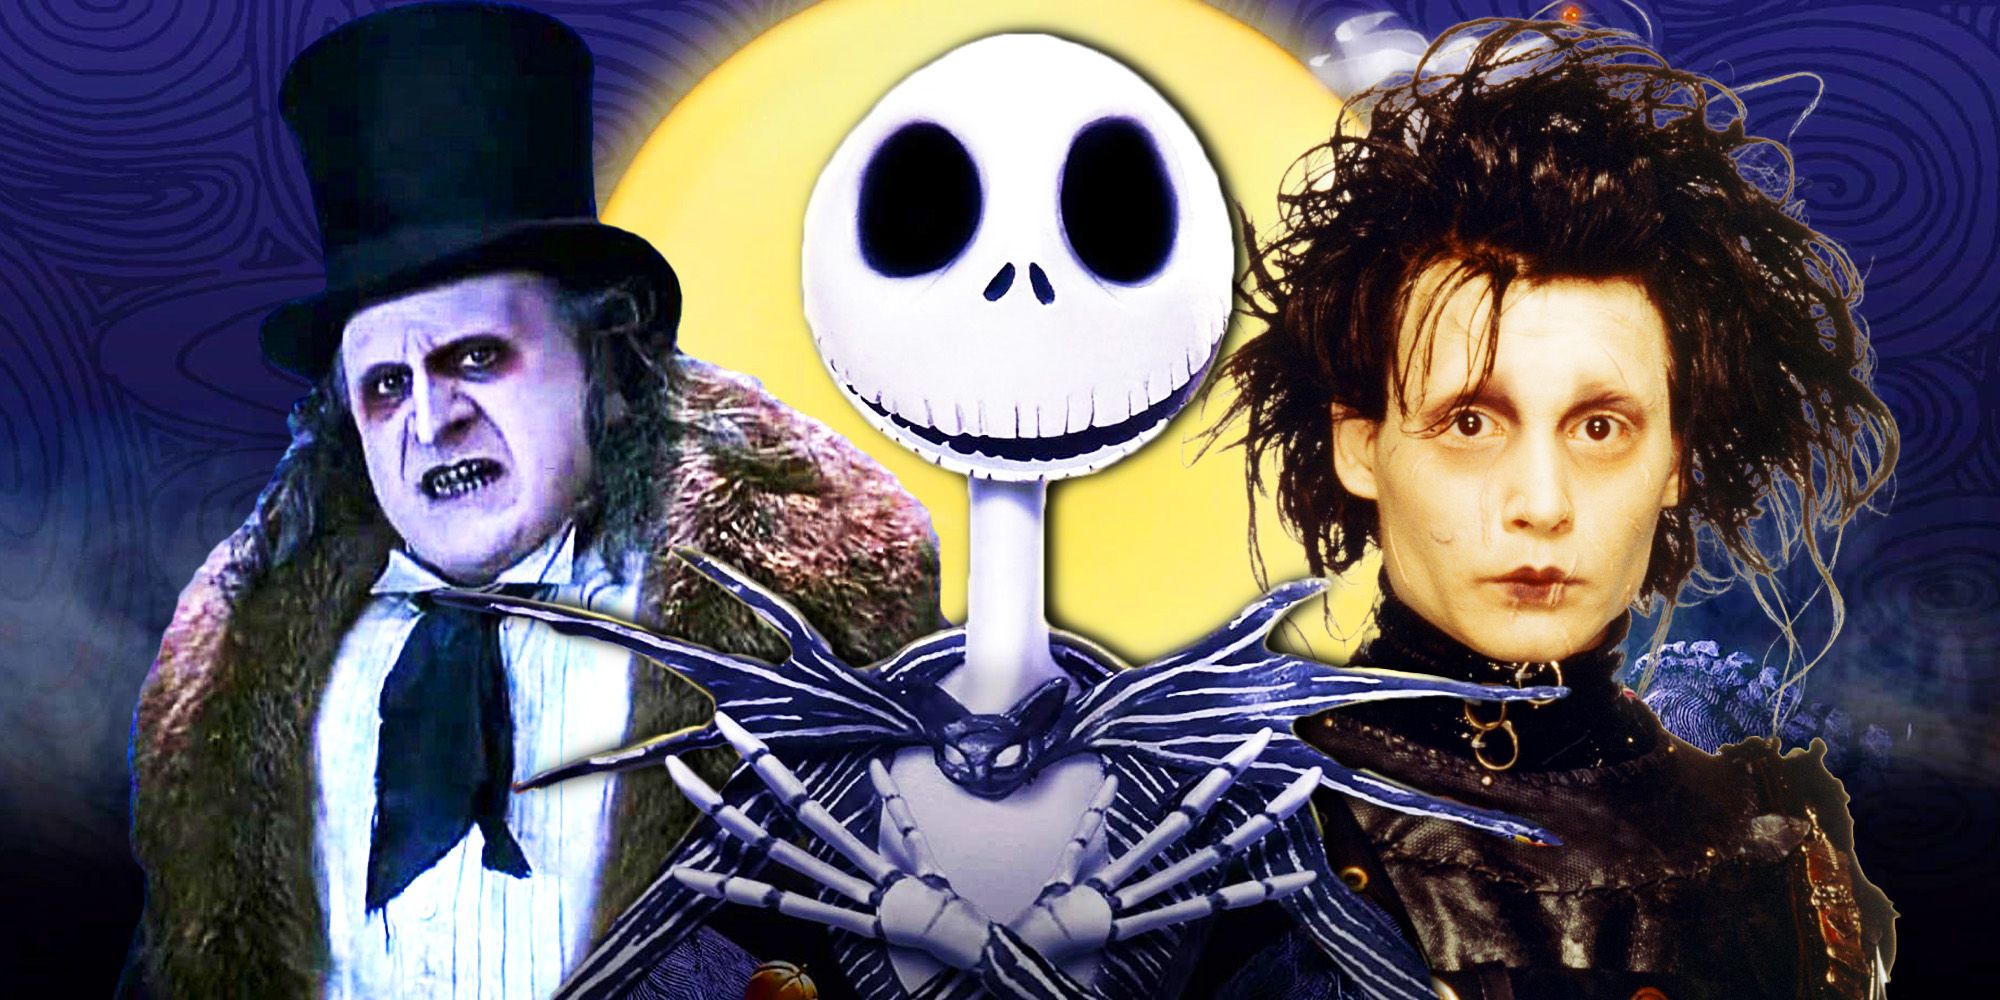 Johnny Depp as Edward Scissorhands, Jack Skellington from Nightmare Before Christmas and Danny DeVito as Penguin from Batman Returns